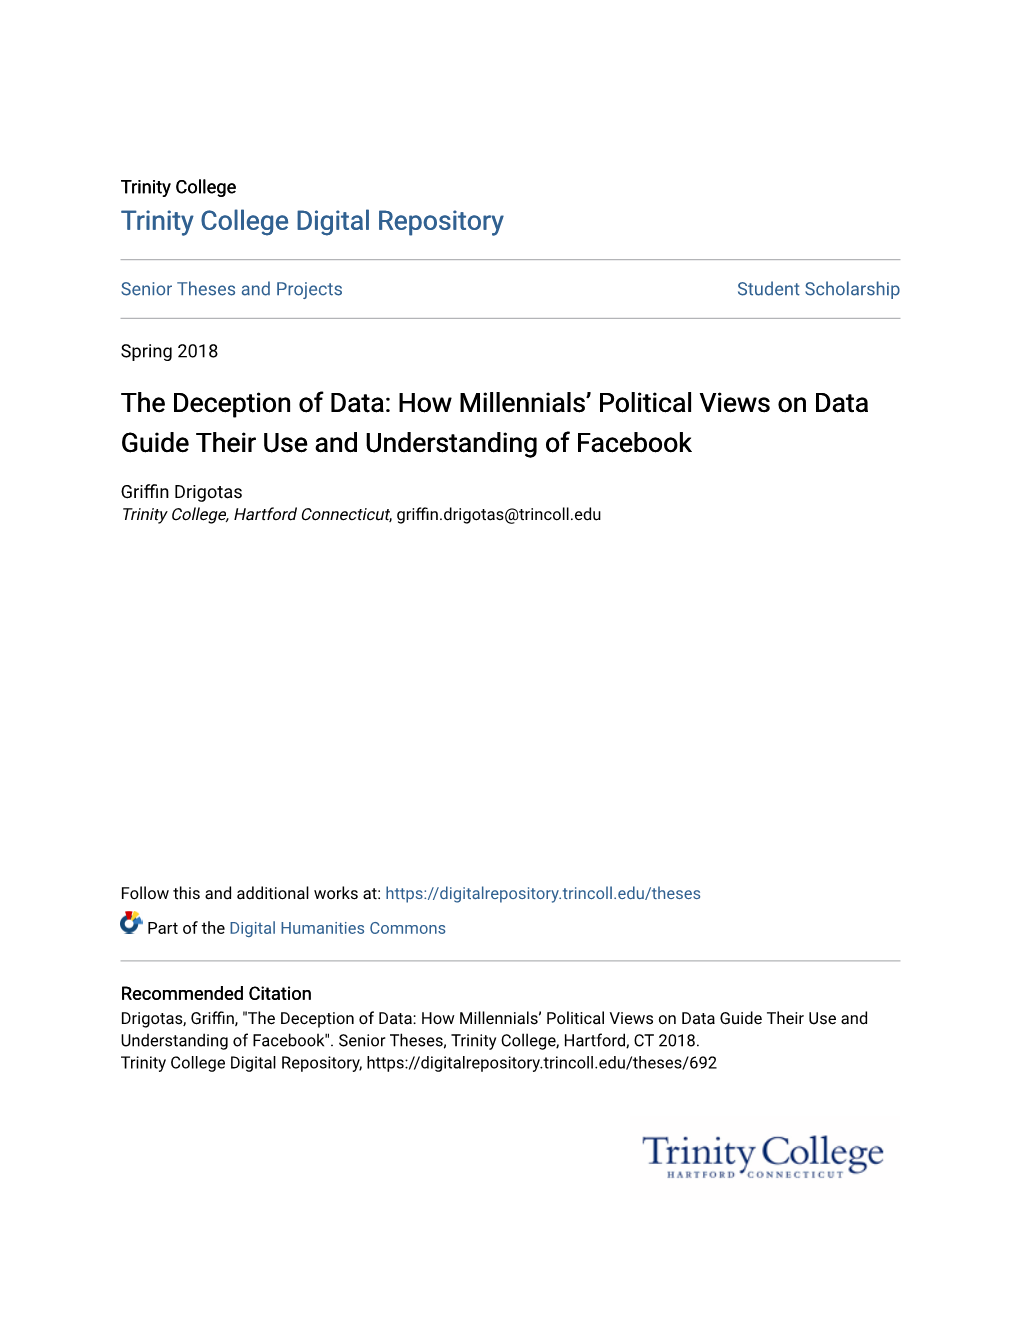 The Deception of Data: How Millennials' Political Views on Data Guide Their Use and Understanding of Facebook